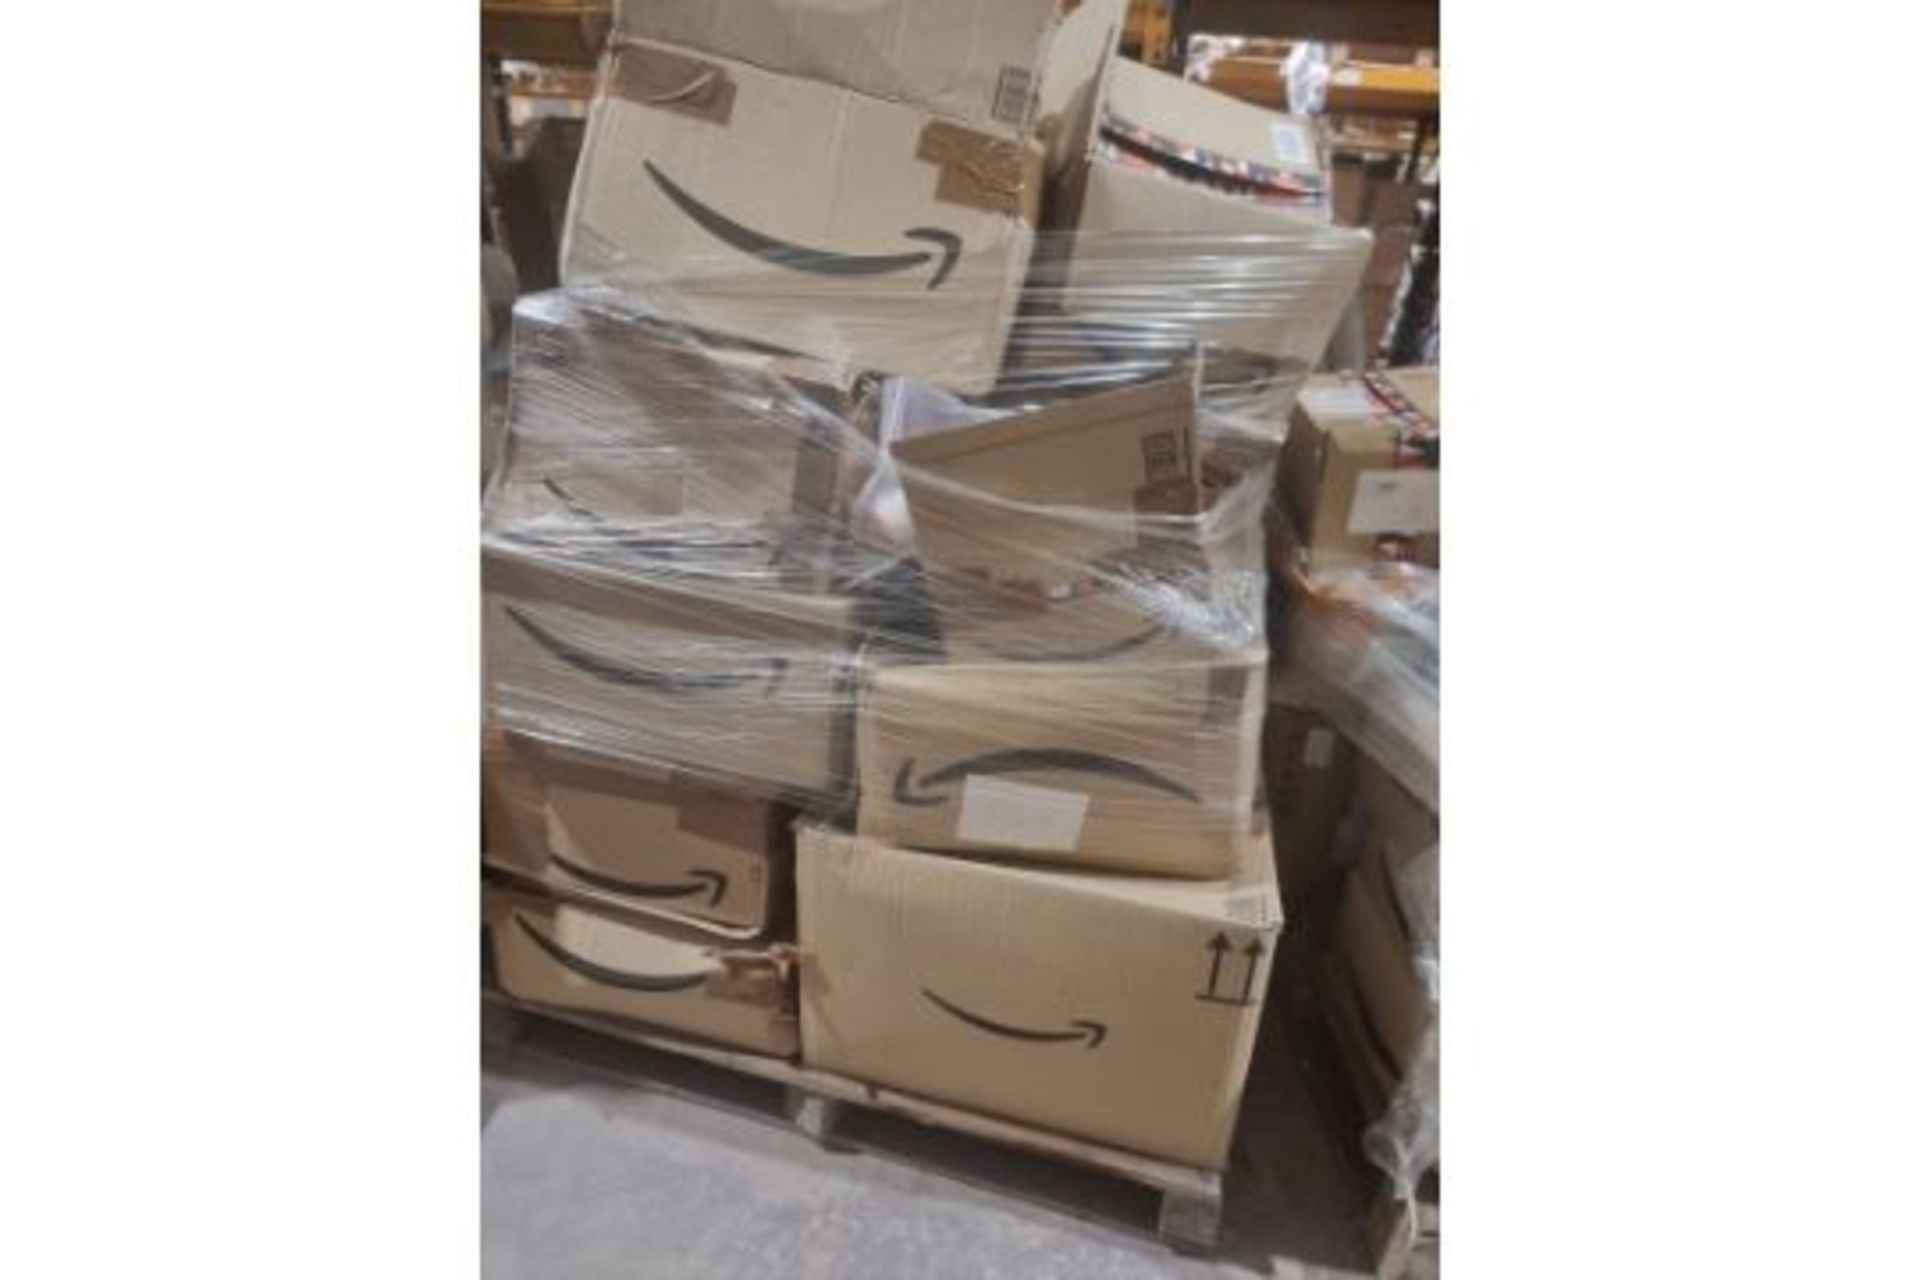 TRADE LOT TO CONTAIN 100 x MIXED BRAND NEW AMAZON OVERSTOCK ITEMS. ITEMS ARE PICKED RANDOMLY FROM - Image 10 of 29